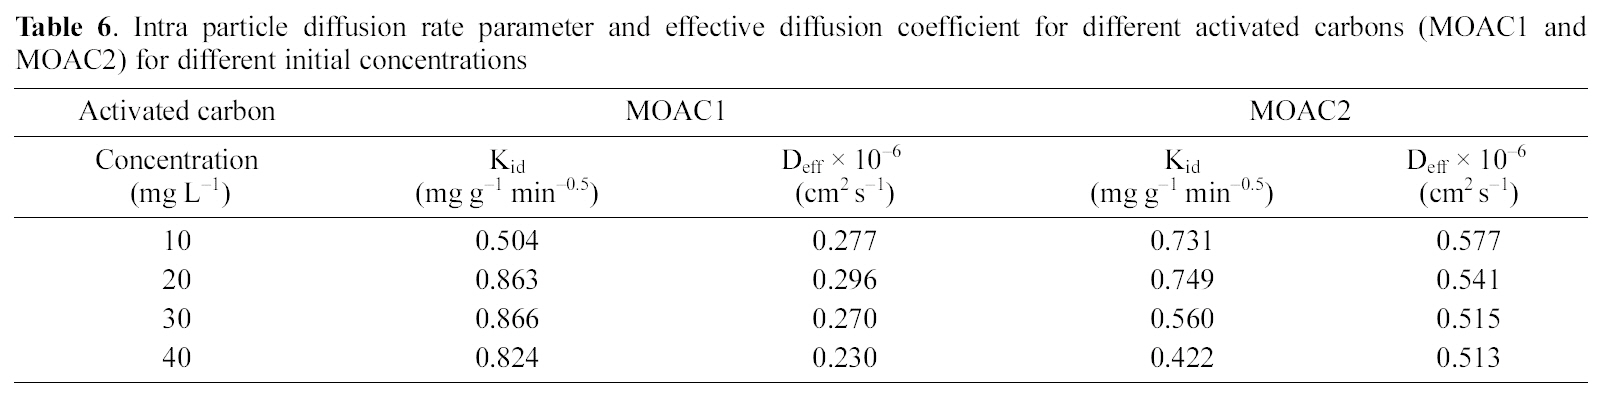 Intra particle diffusion rate parameter and effective diffusion coefficient for different activated carbons (MOAC1 and MOAC2) for different initial concentrations